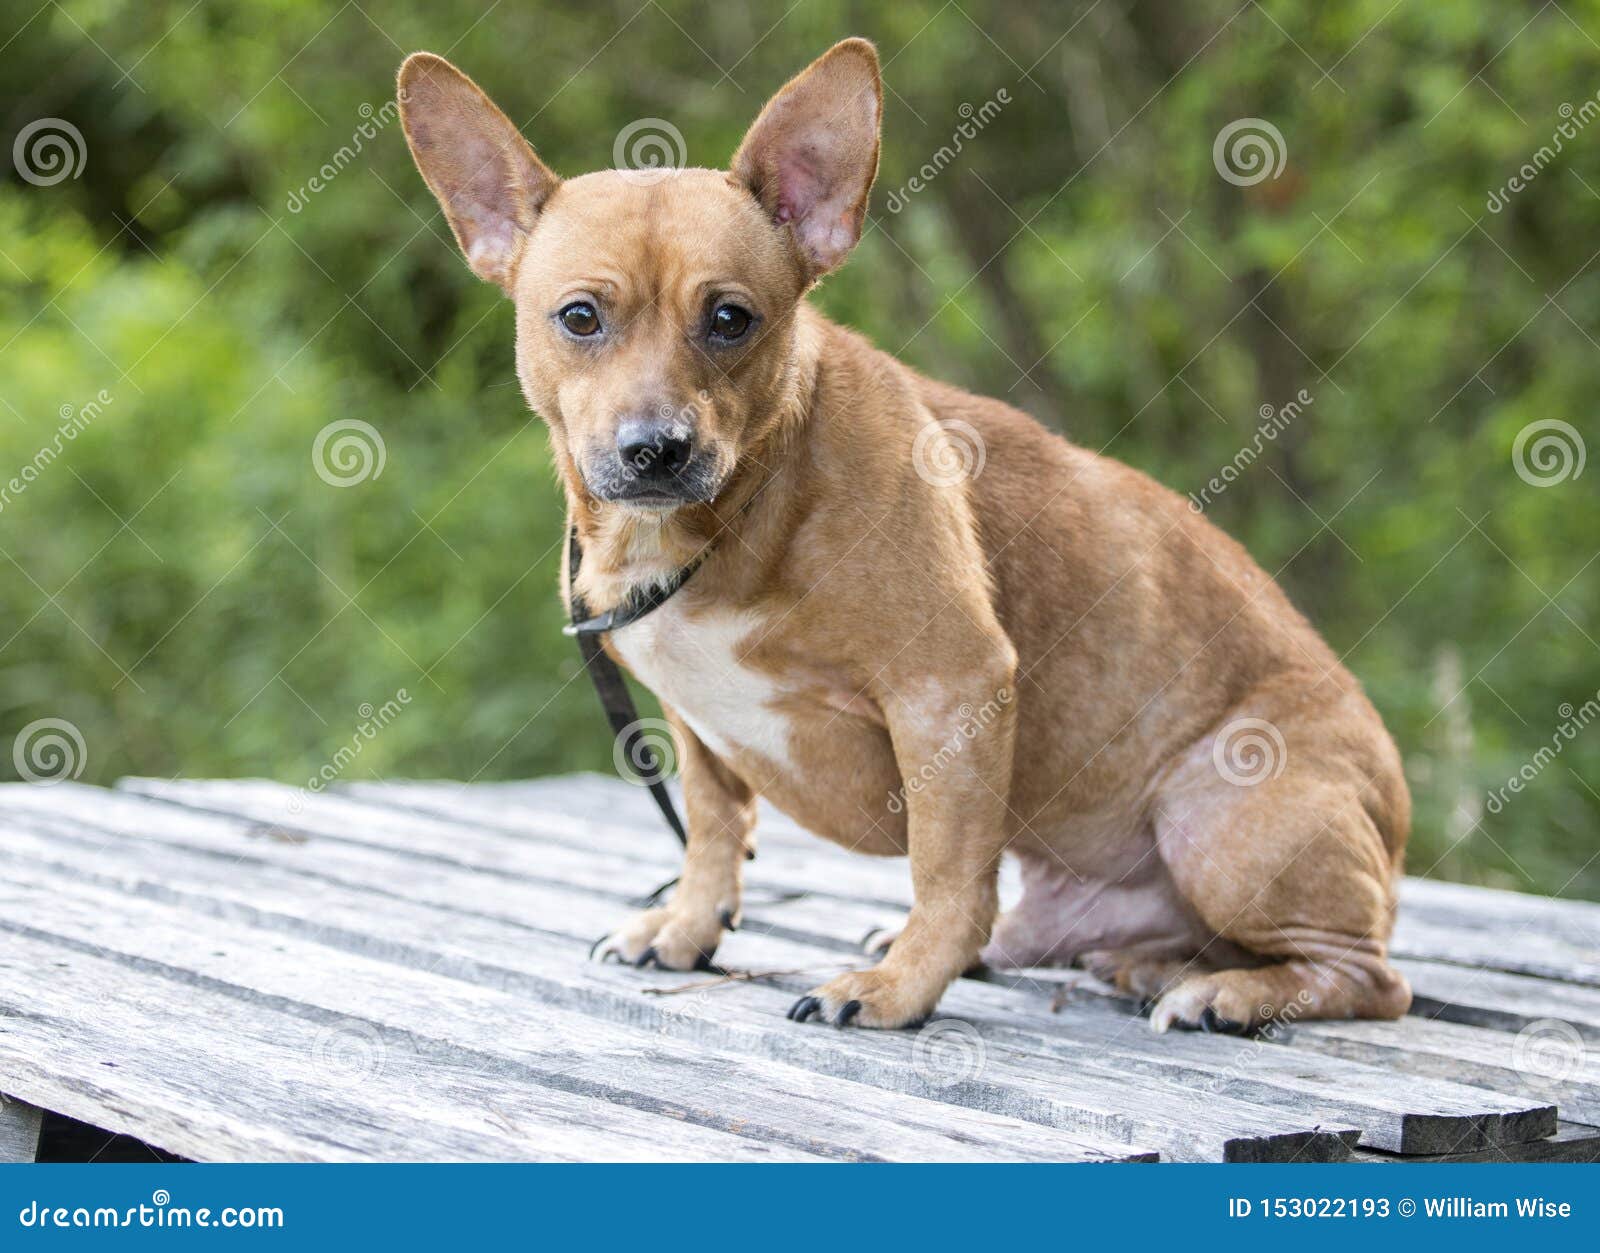 Formindske Blacken Email Miniature Pinscher Chihuahua Mixed Breed Dog Adoption Photo Stock Image -  Image of chihuahua, loss: 153022193